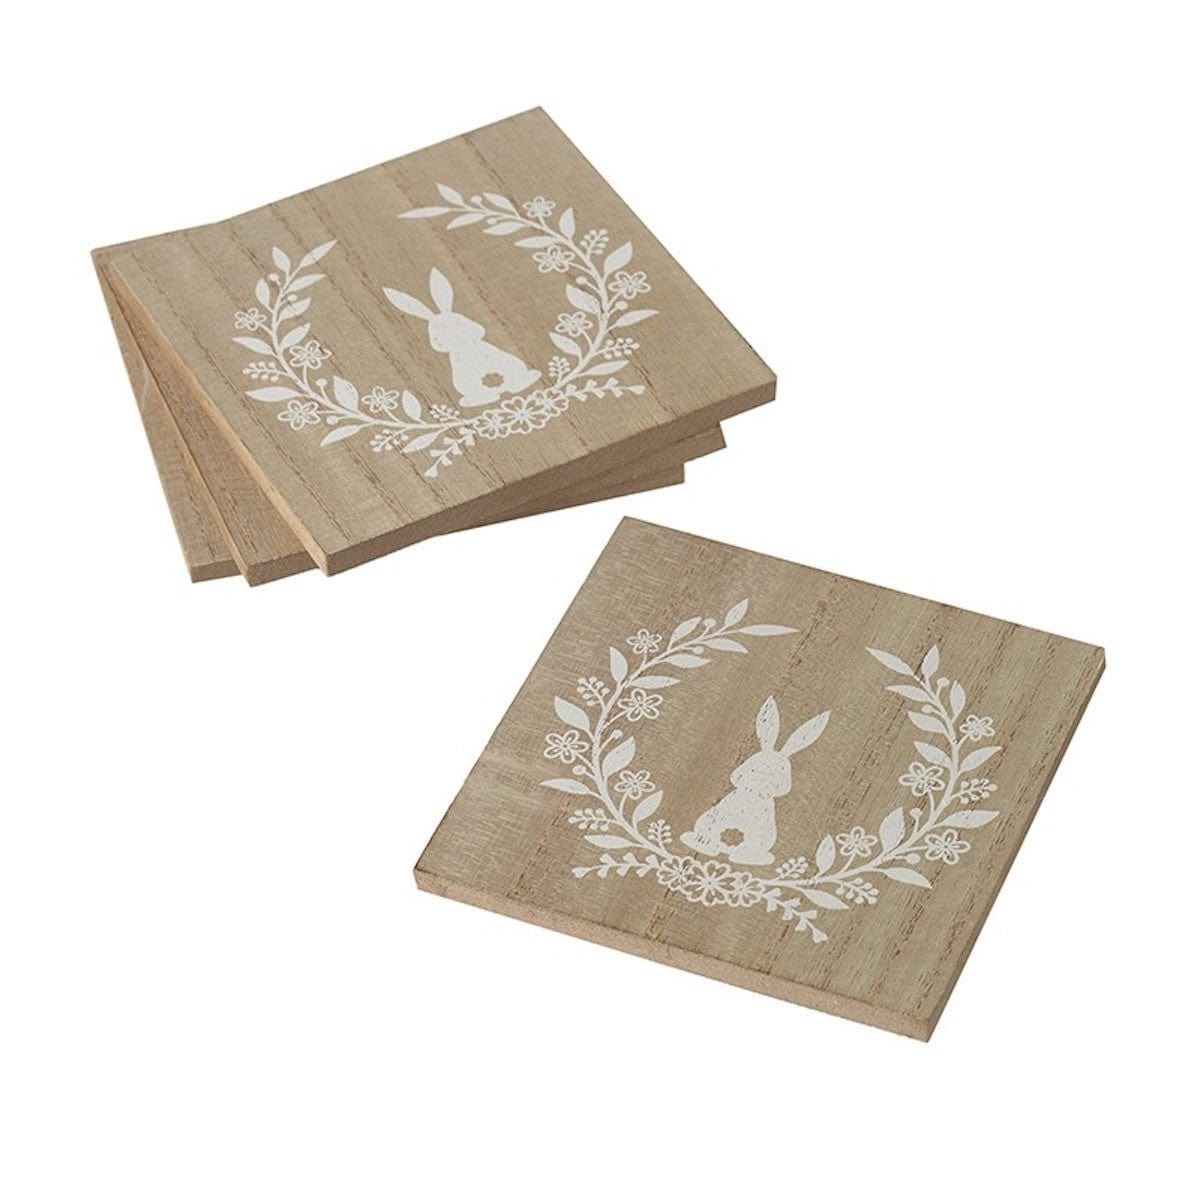 Heaven Sends Easter Decorations Wooden Easter Rabbit Set of Four Coasters